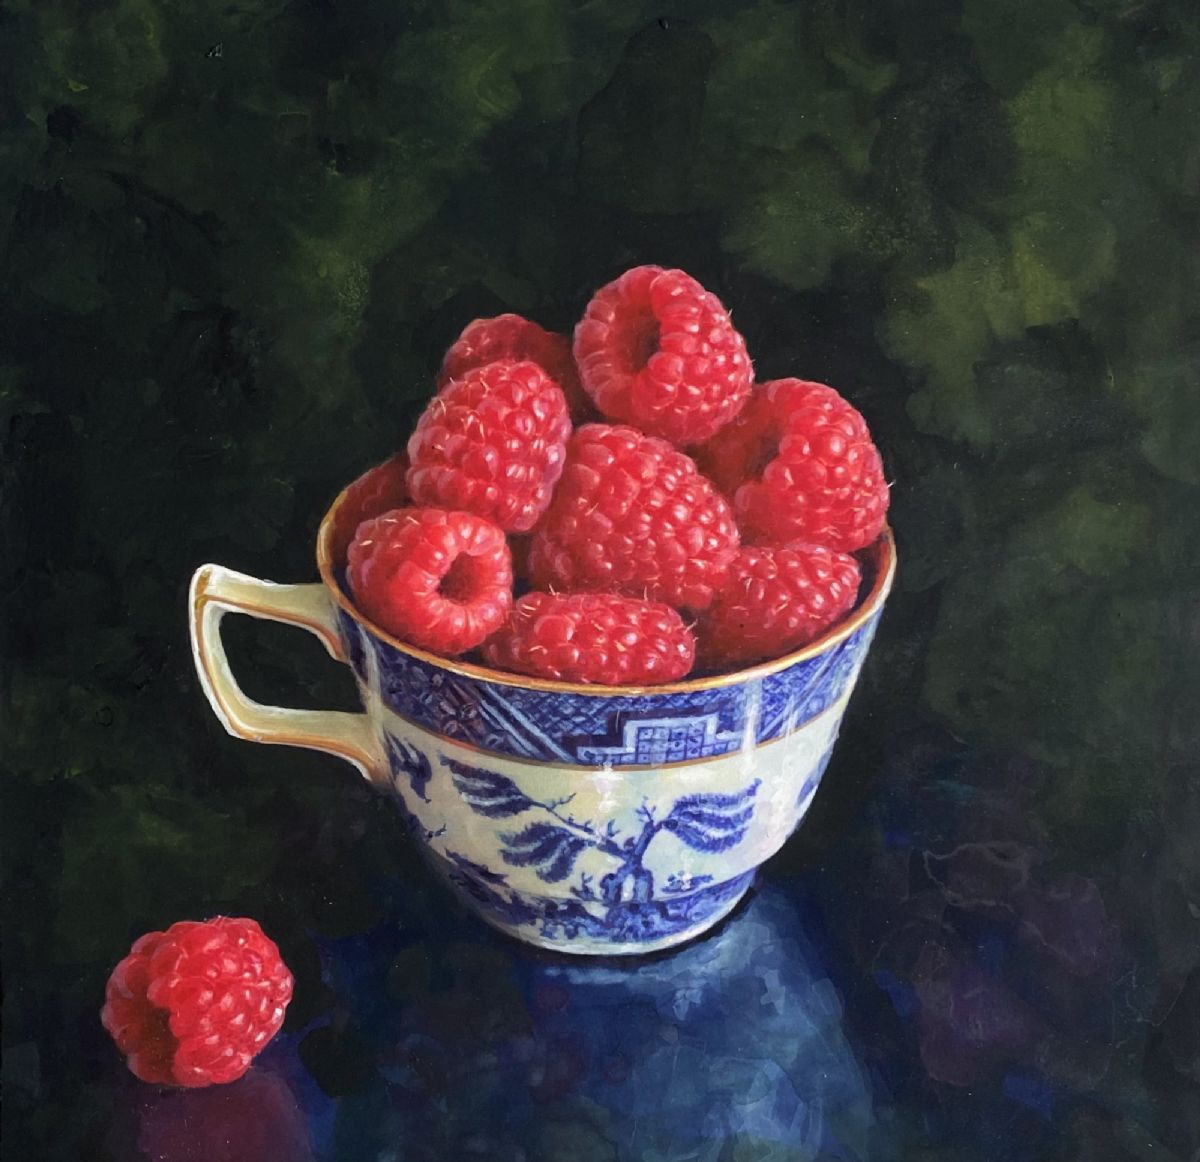 Raspberries in a Willow Pattern Cup